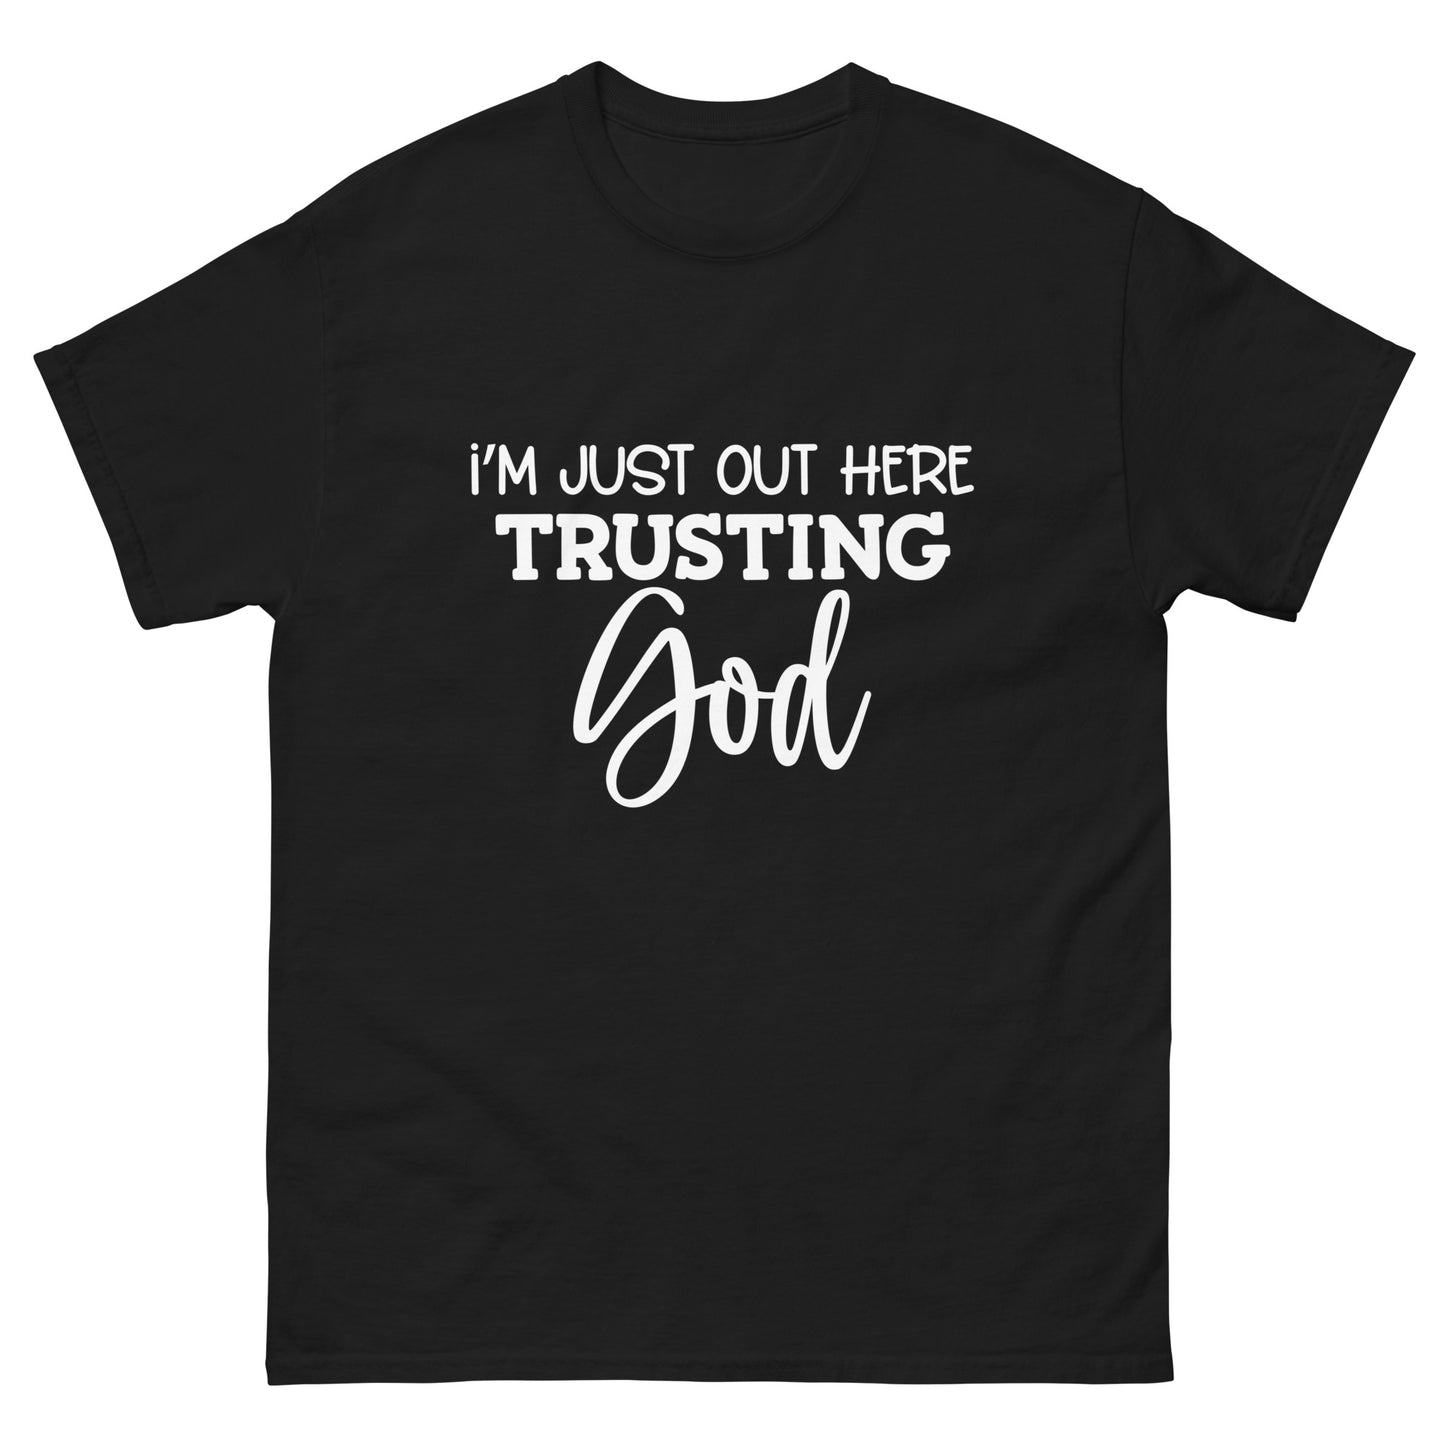 Just Out Here Trusting In God classic tee